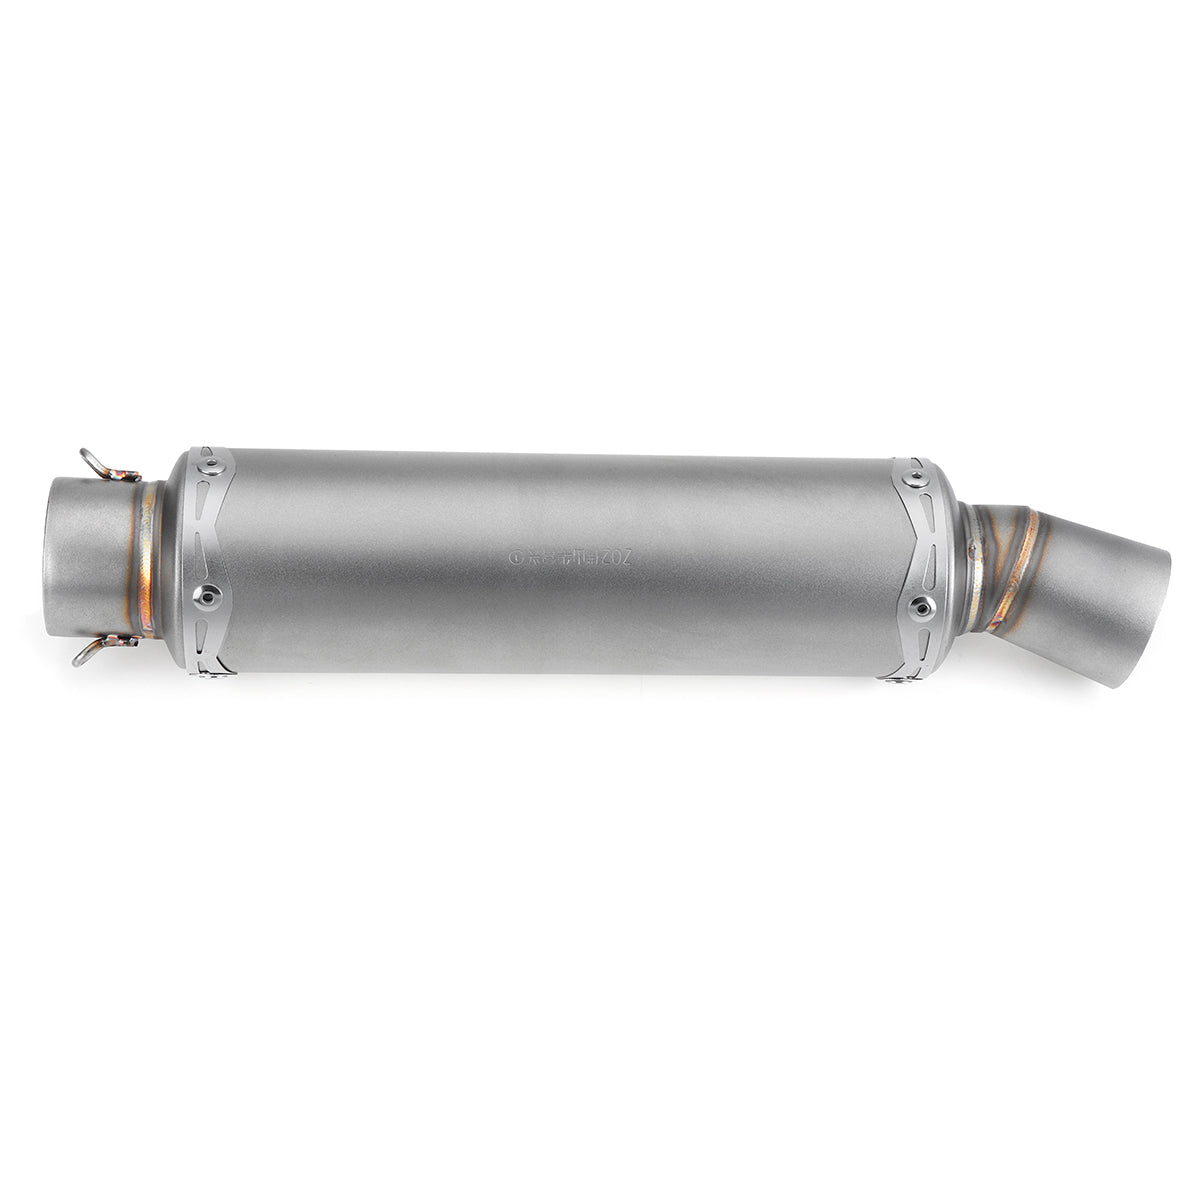 Dark Gray Inlet 36-51mm Motorcycle Exhaust Tail Tip Pipe Muffler Stainless Steel Modified Universal Titanium